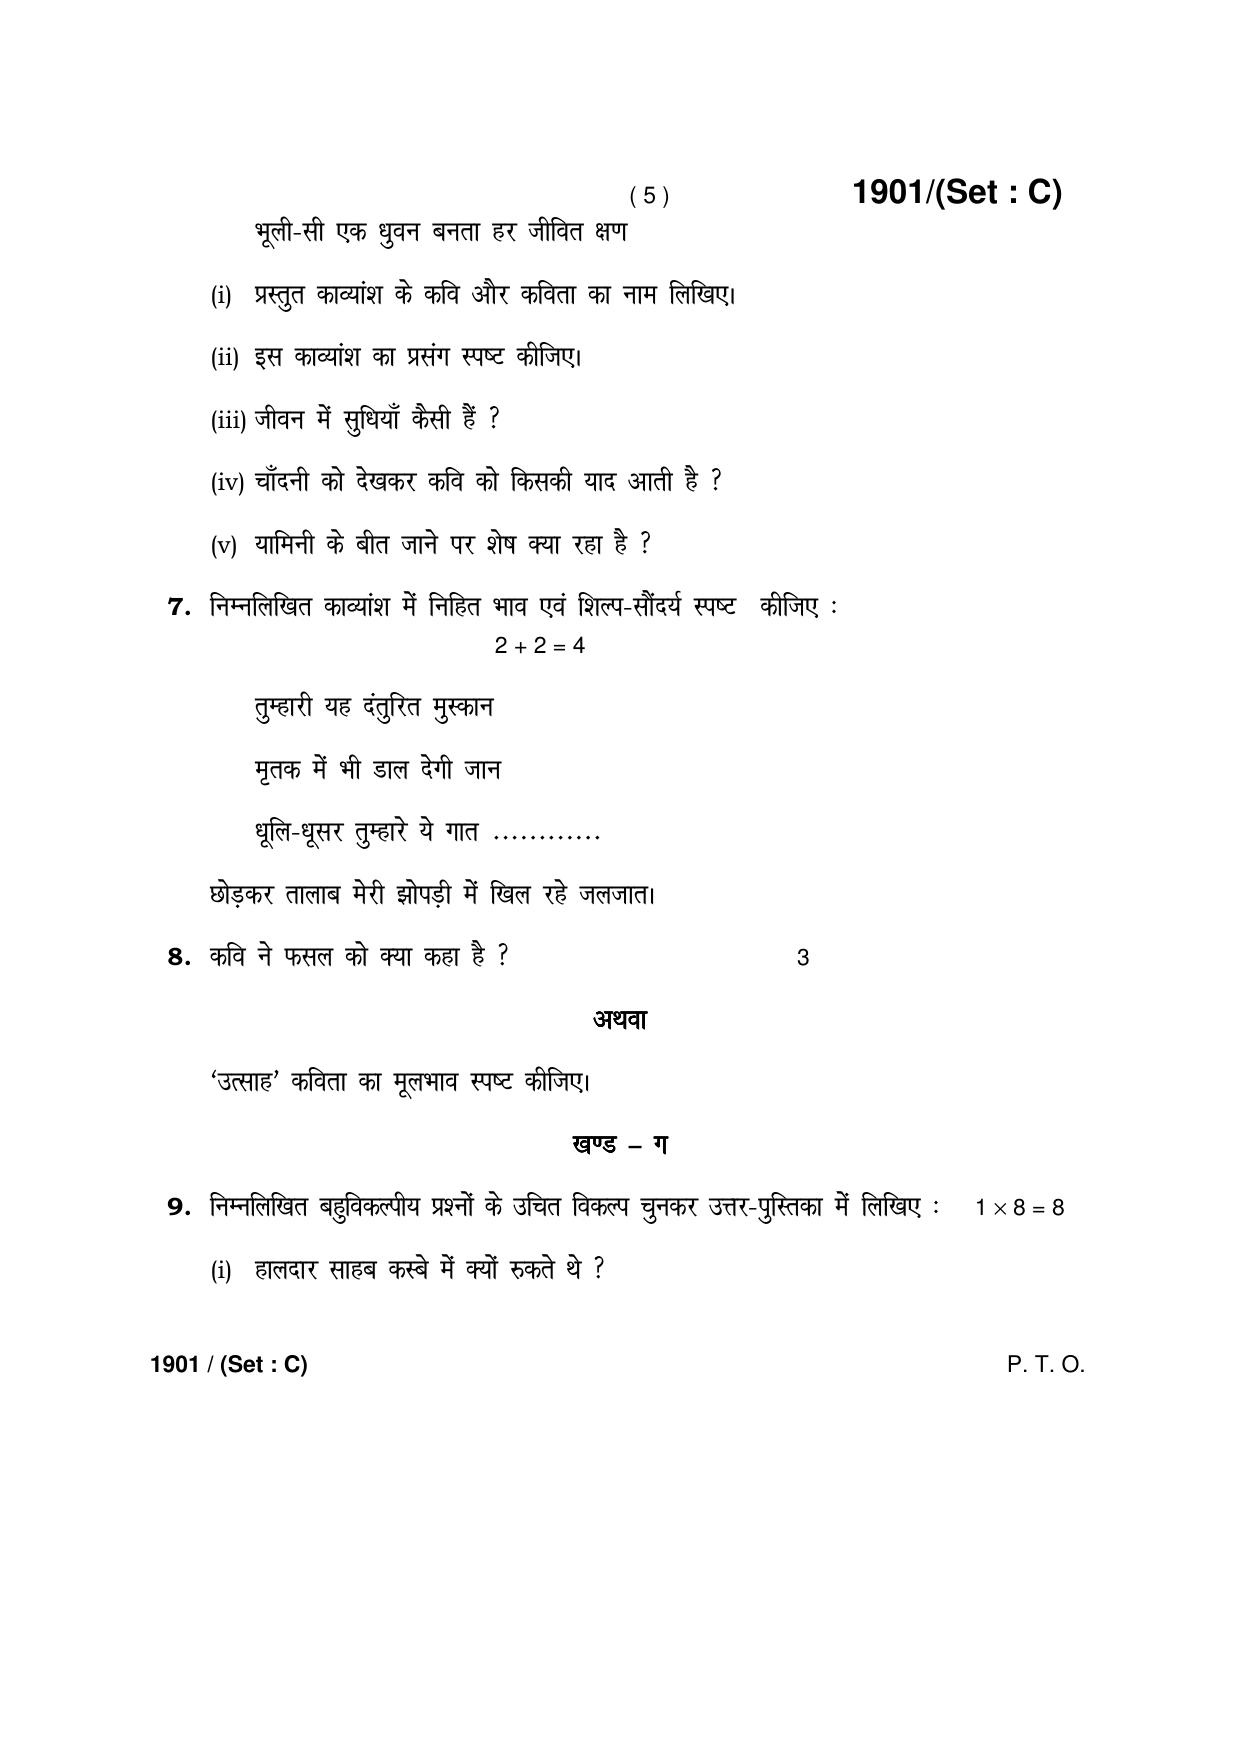 Haryana Board HBSE Class 10 Hindi -C 2017 Question Paper - Page 5